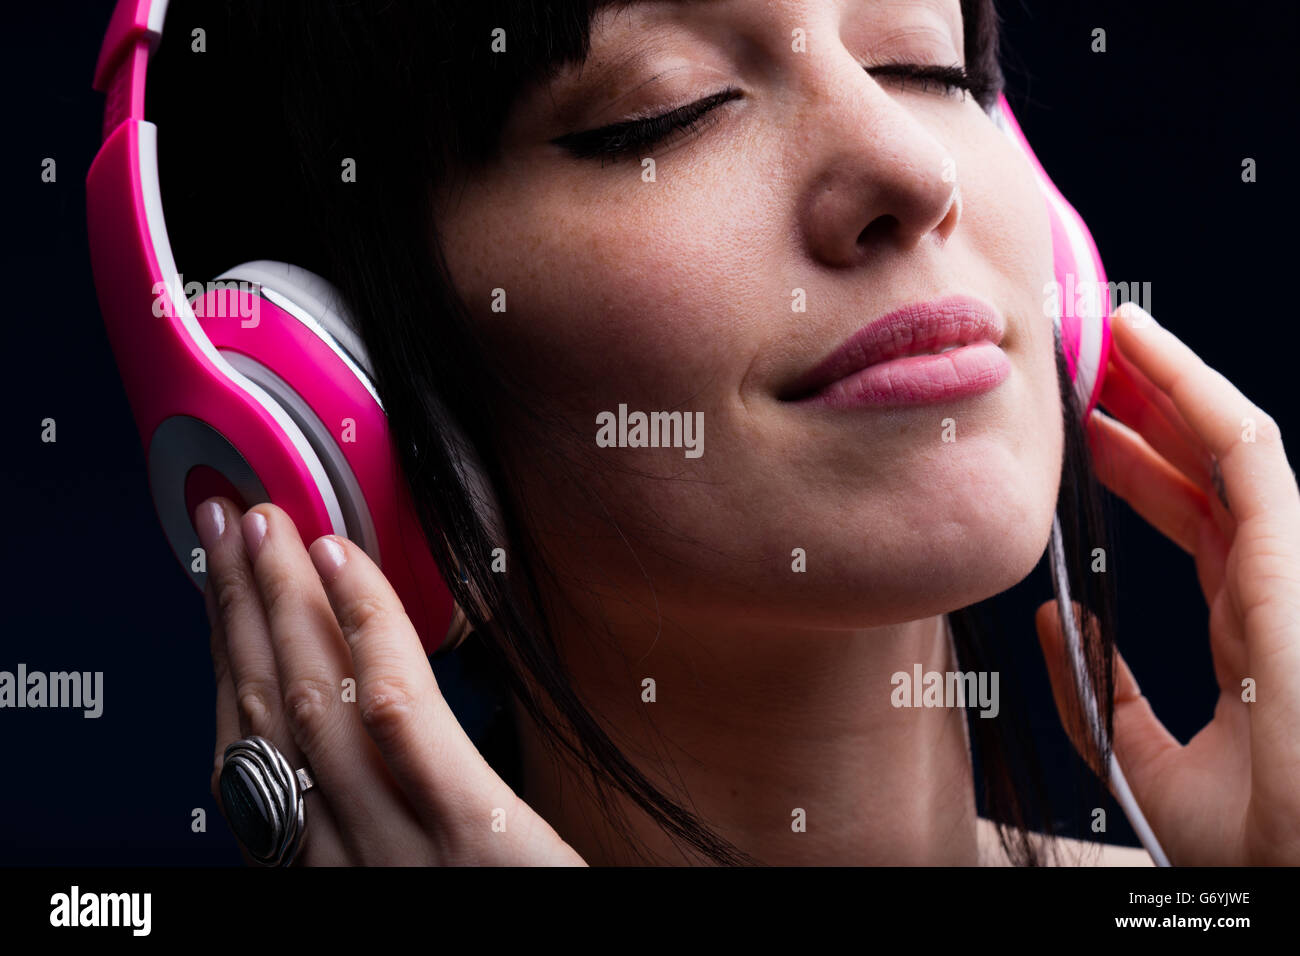 Female with closed eyes and pleasant grin using pink and white headphones over blue background Stock Photo